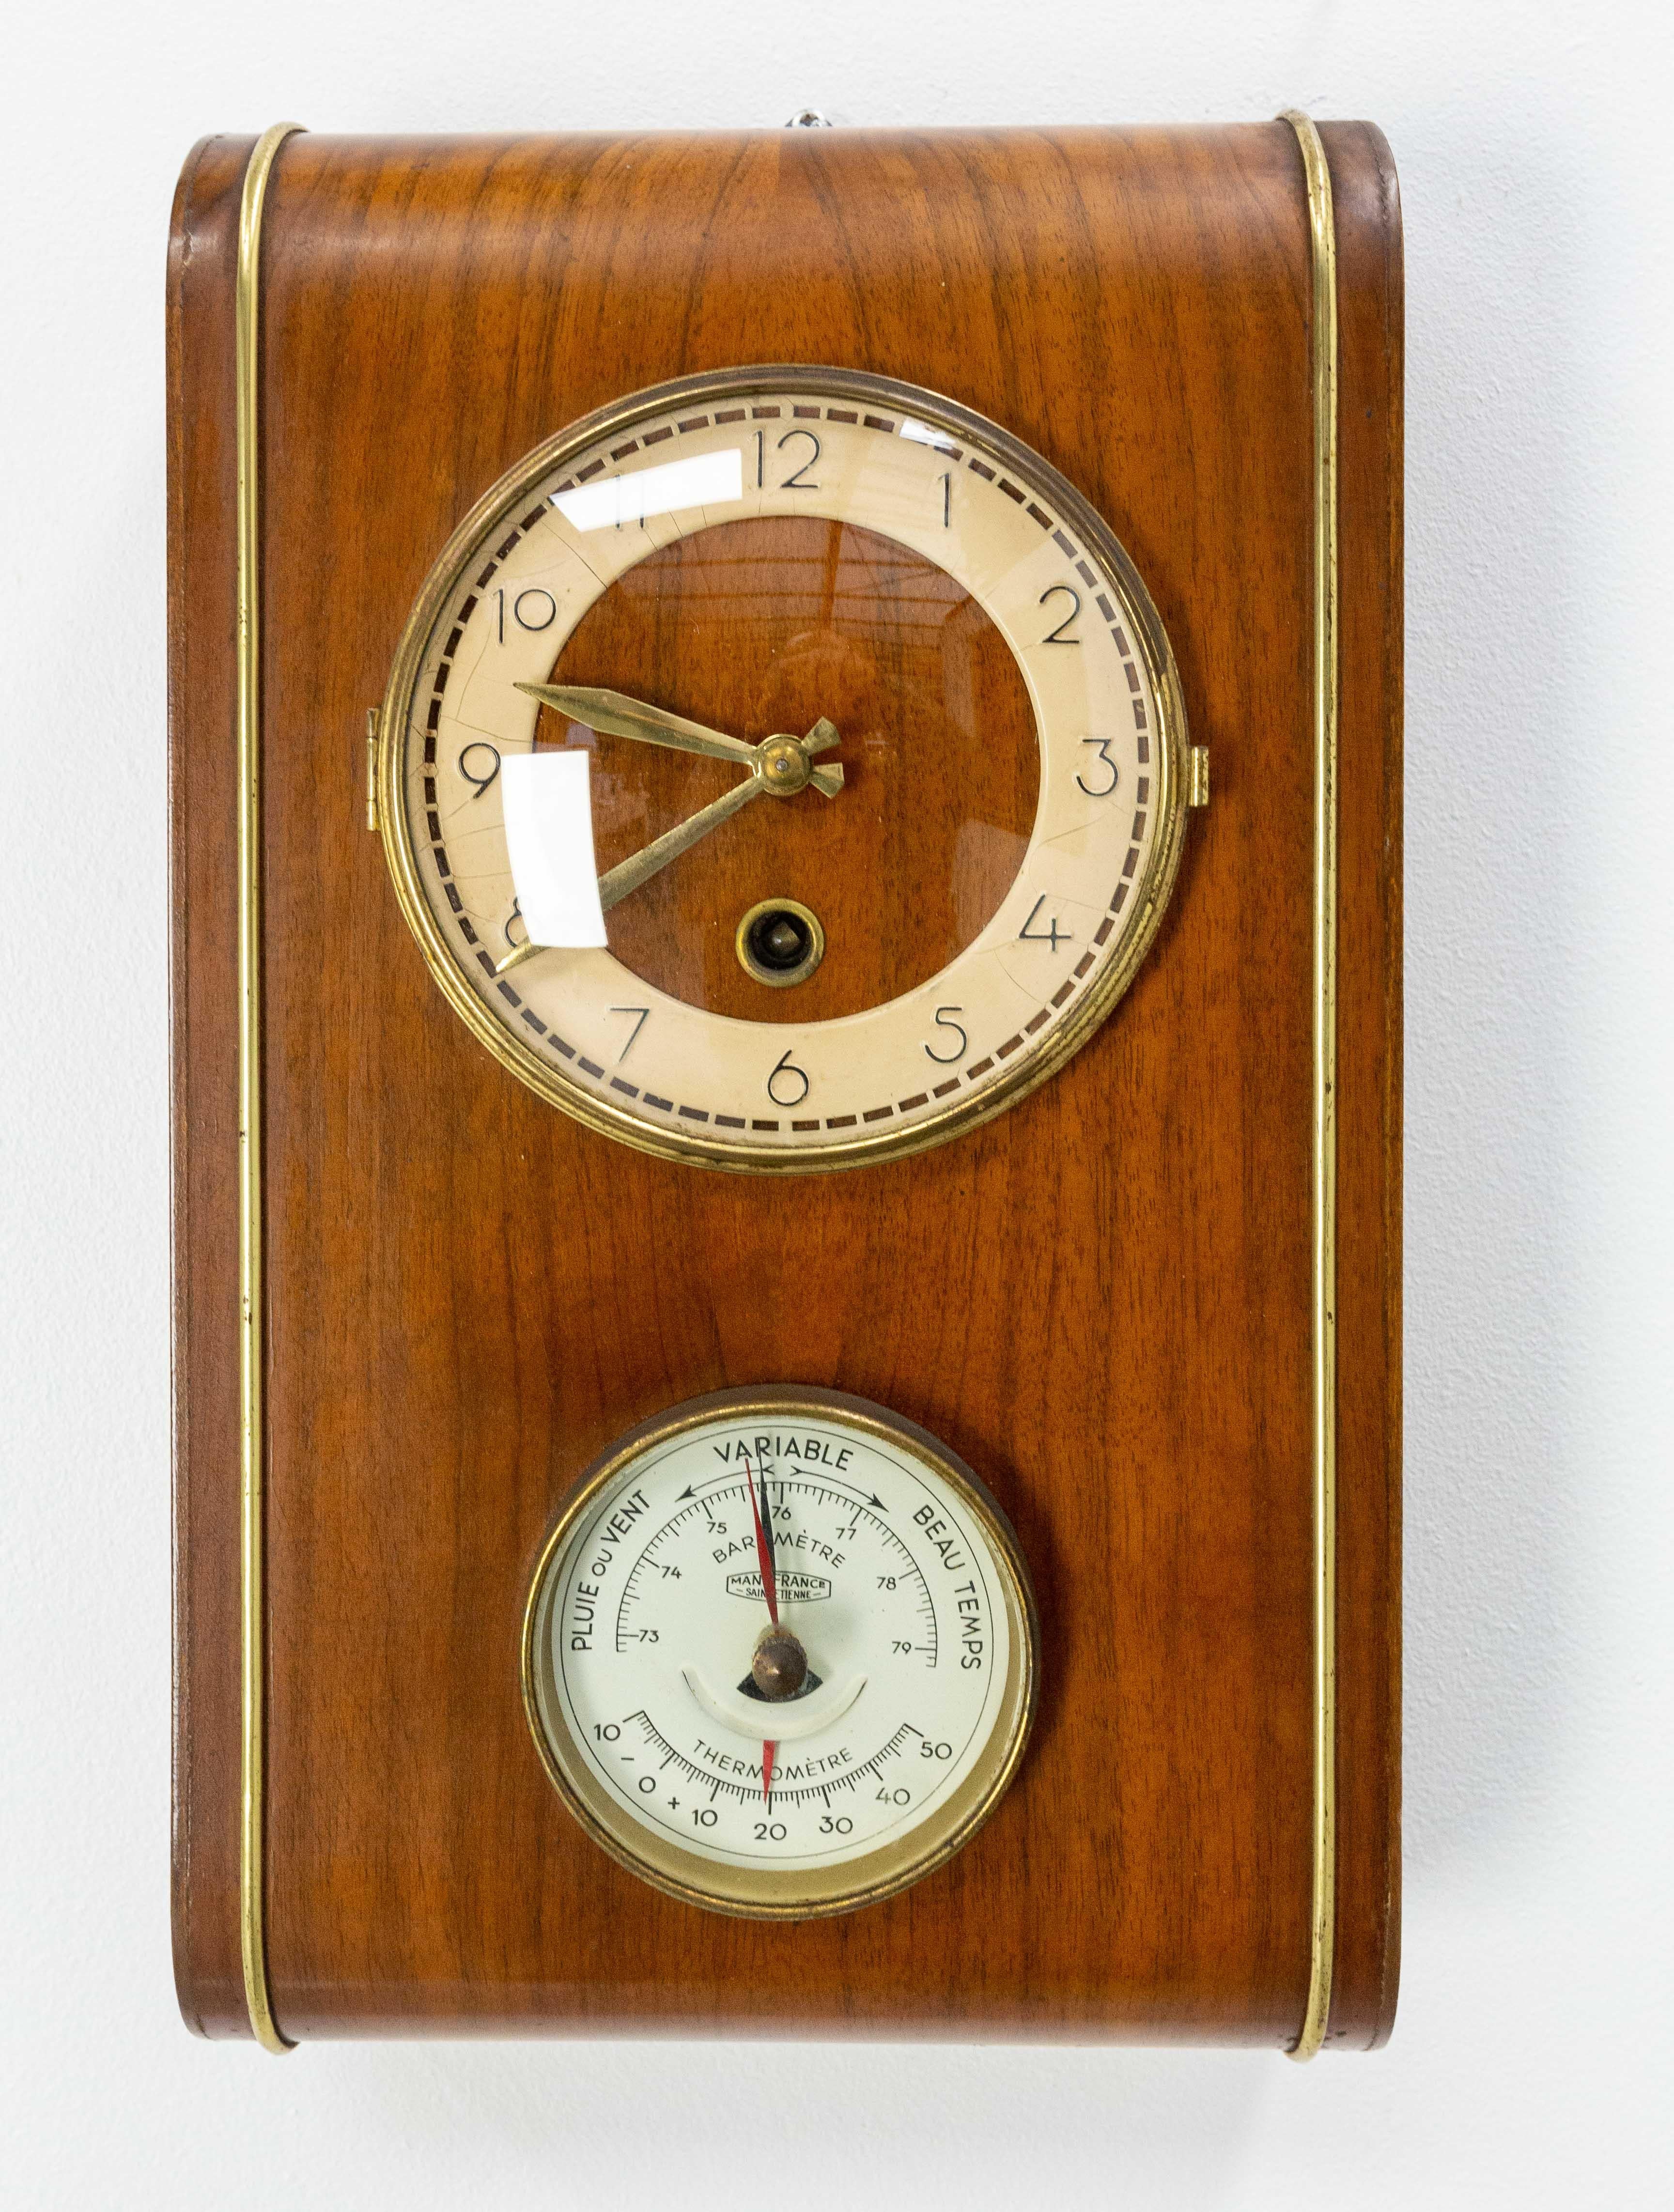 Clock and aneroid barometer in walnut made circa 1960.
The aneroid barometer (or holosteric barometer) was developed by the Frenchman Lucien Vidie who filed a patent for it in 1844 (in collaboration with Antoine Redier, inventor of the alarm